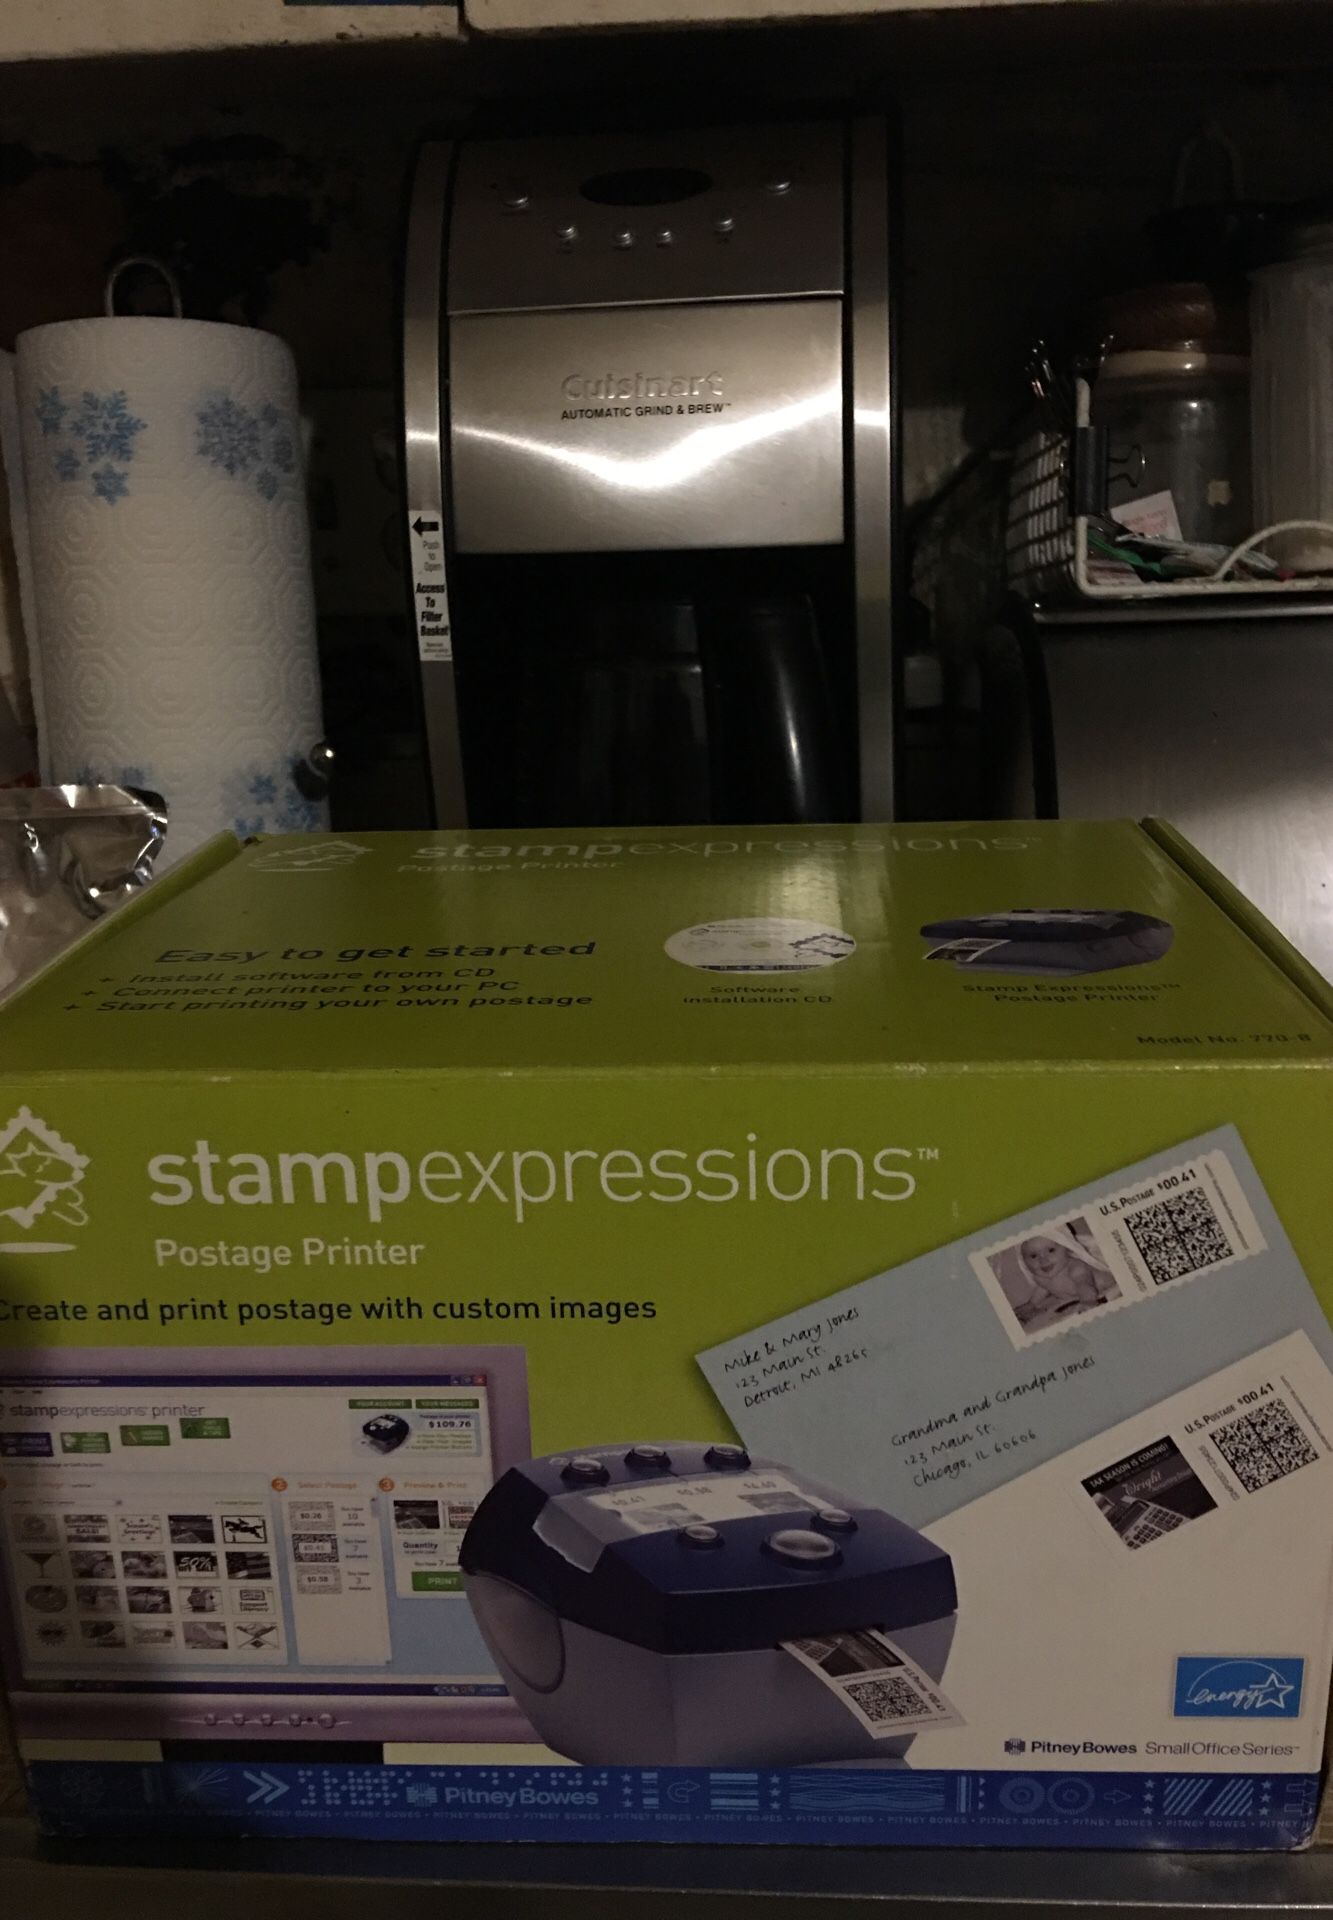 Postage printer/ Stamp expressions